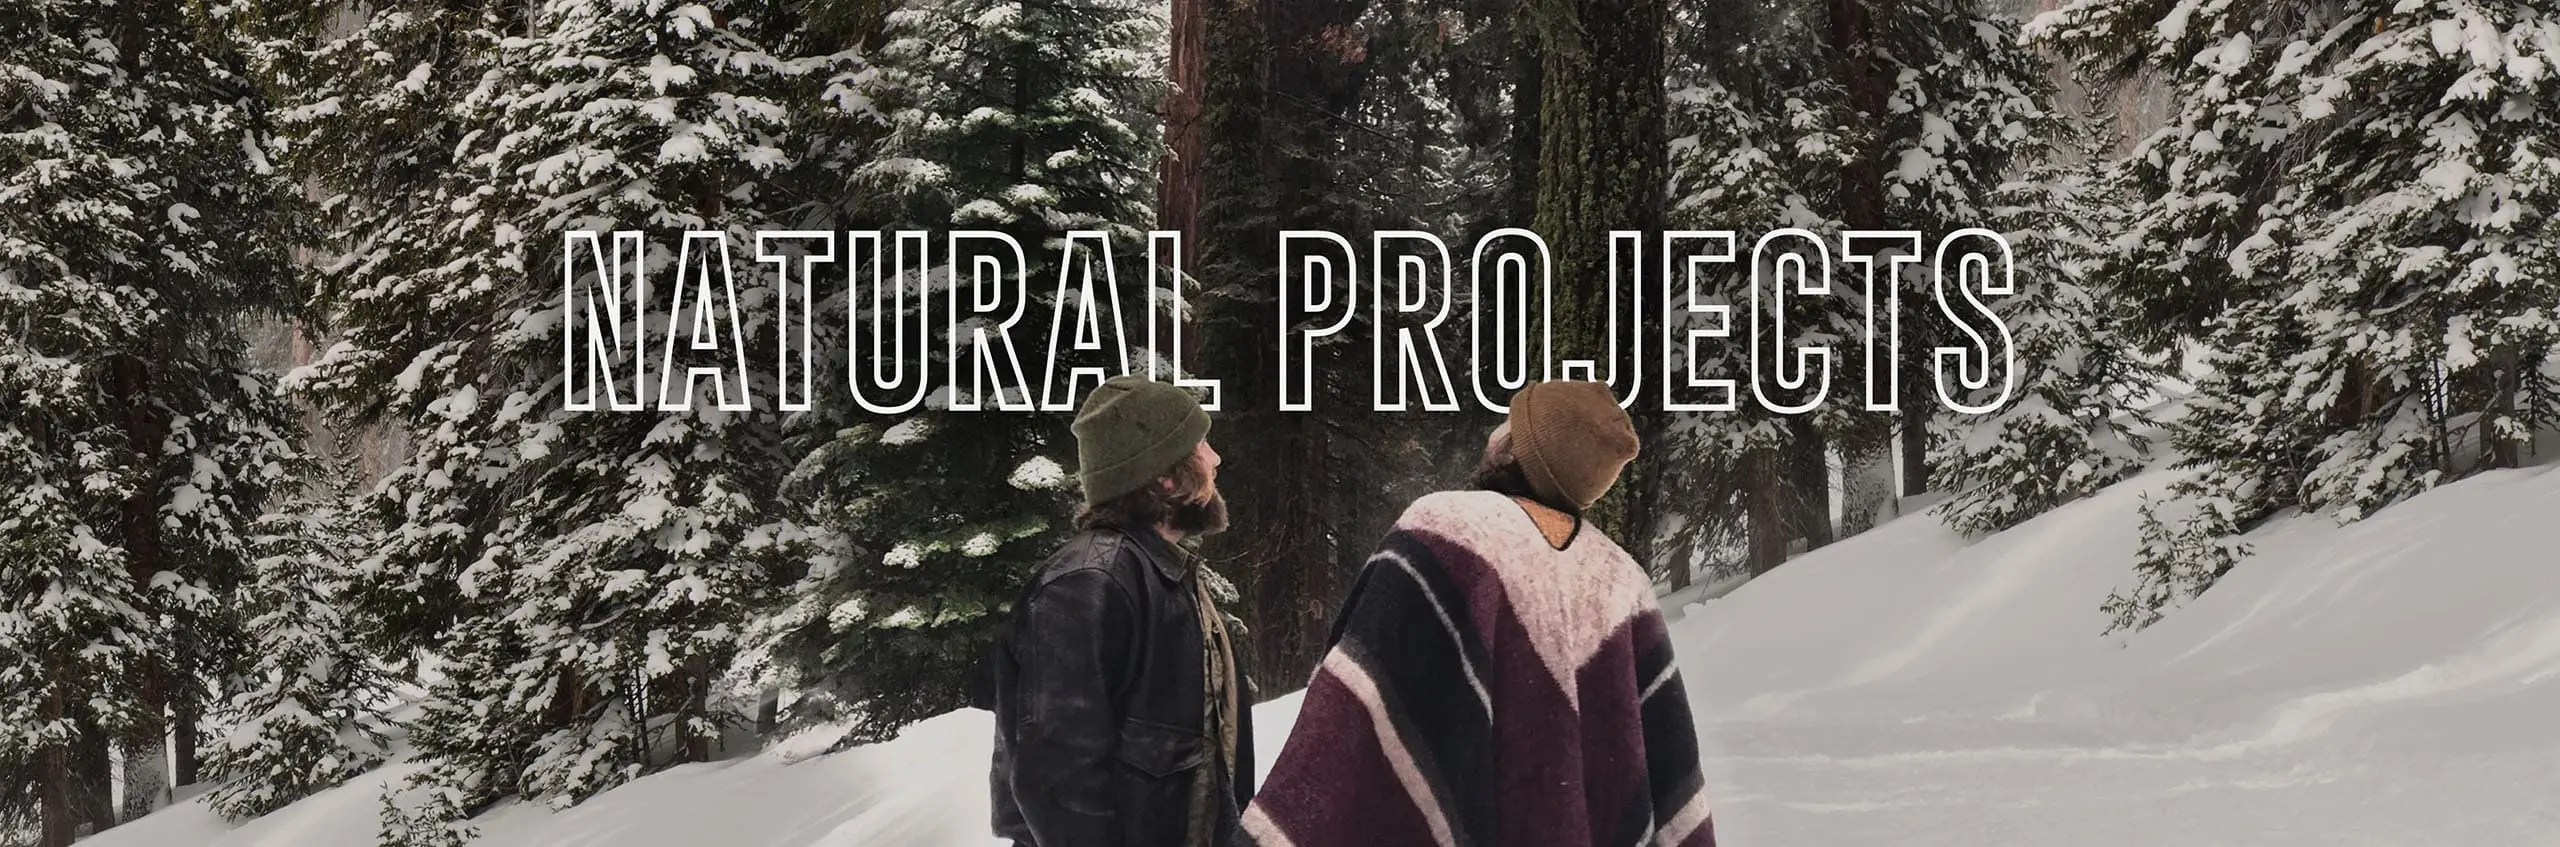 Natural Projects